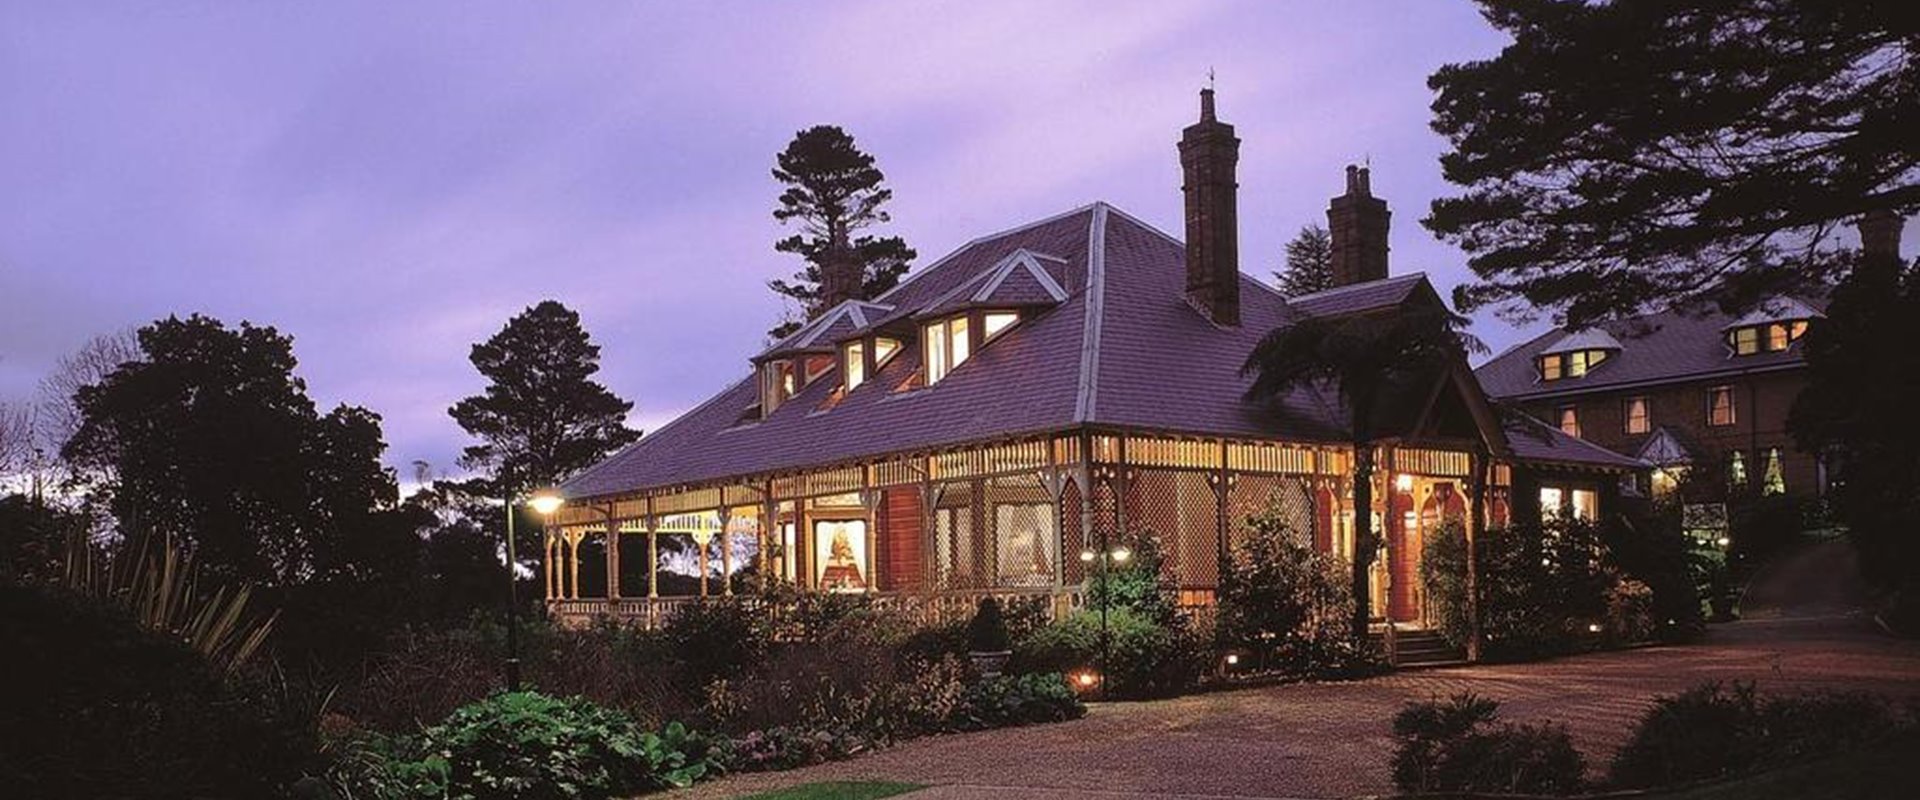 Lilianfels Resort & Spa | Conference Venues Blue Mountains | Conference Venues New South Wales